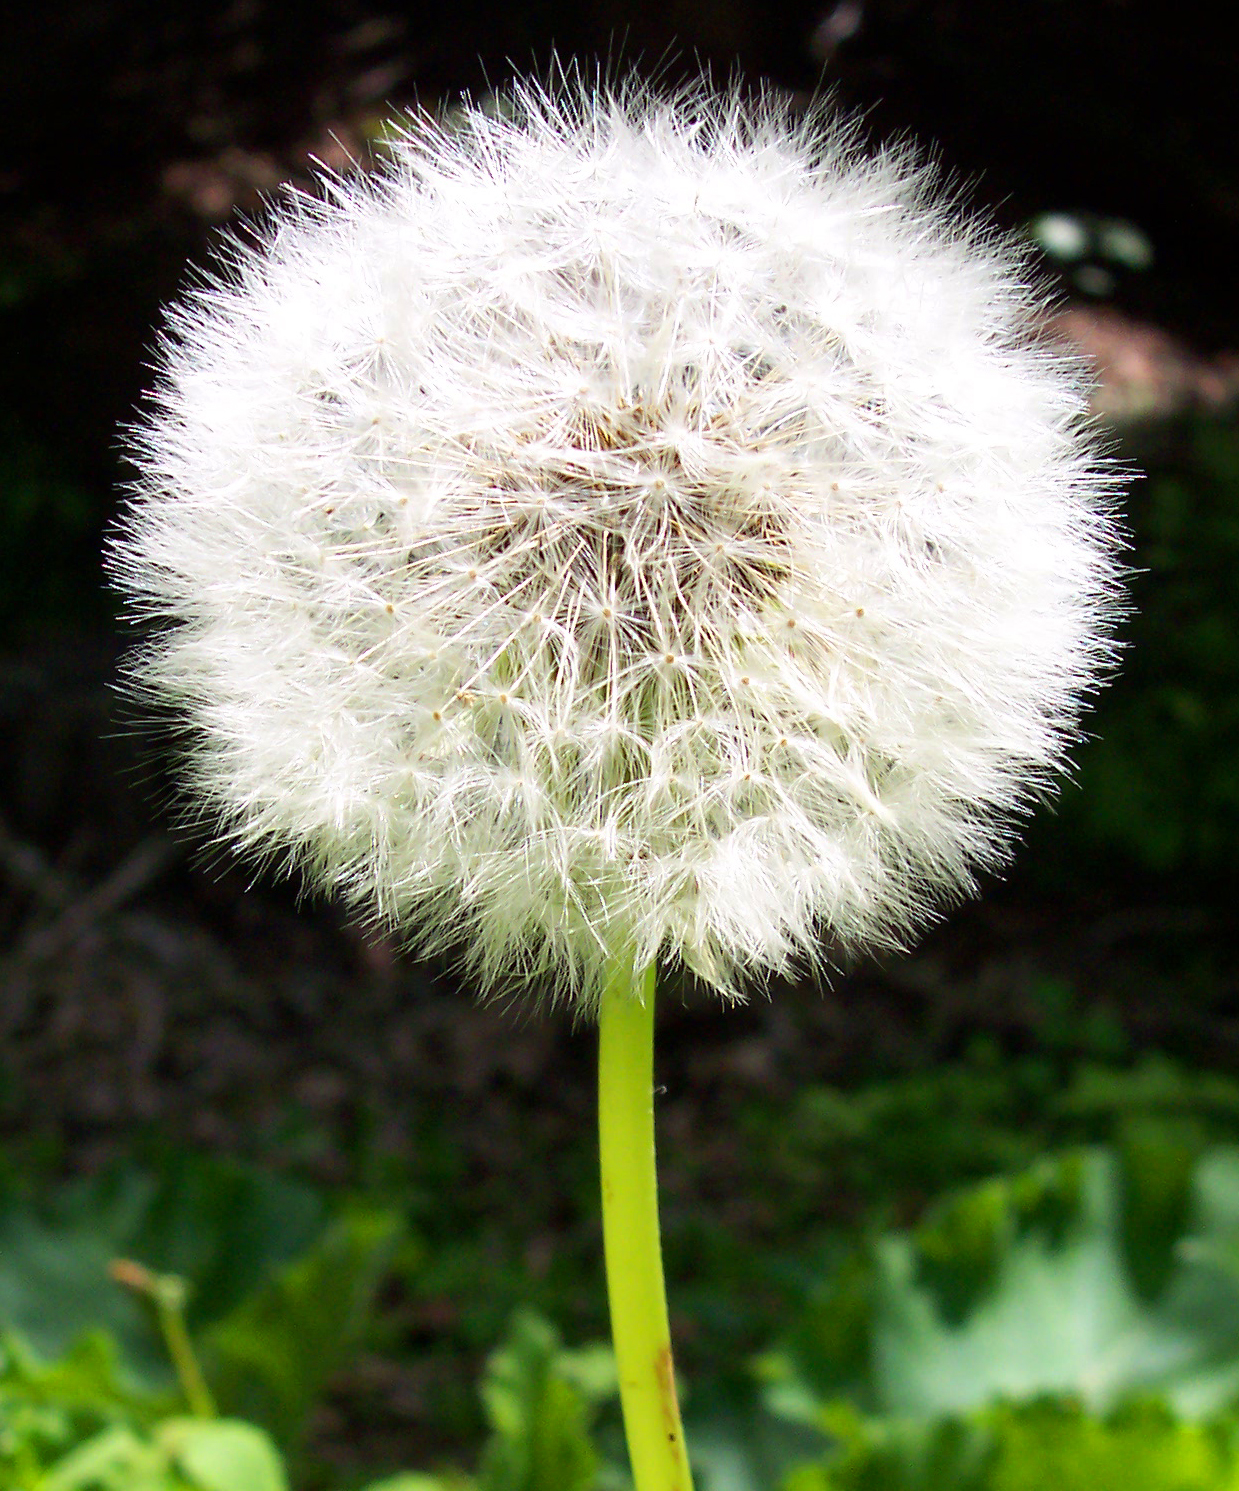 the seed of a dandelion is ready for picking up